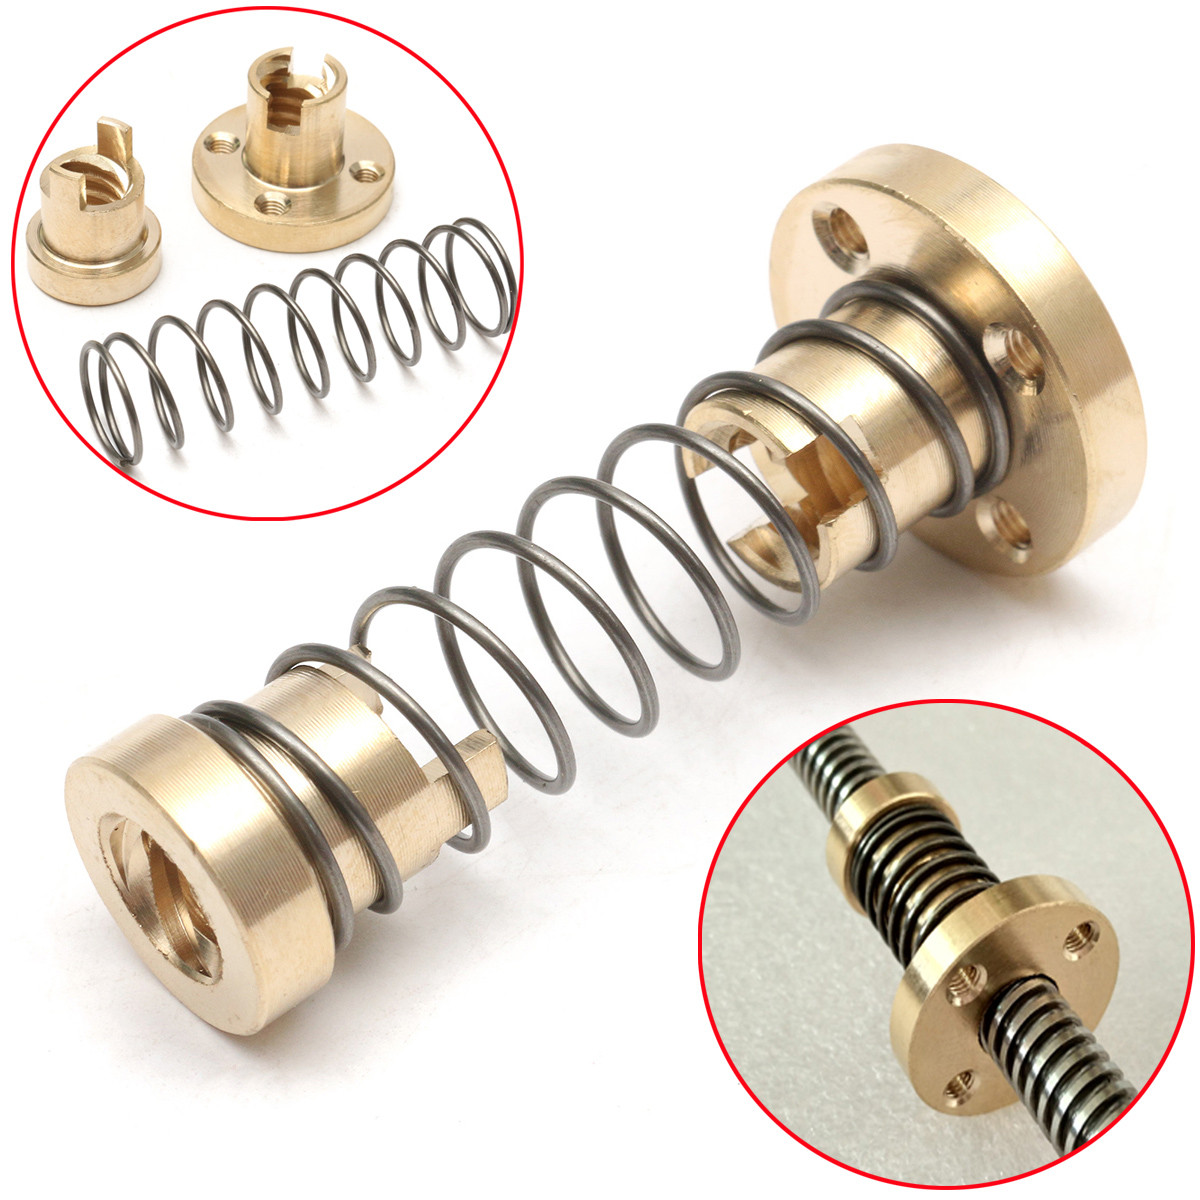 ReliaBot 2pcs T8 Tr8x2 Anti Backlash Spring Loaded Nut Elimination Gap for 2mm Lead Acme Threaded T8x2 Lead Screw 2mm Pitch, 1 Start, 2mm Lead